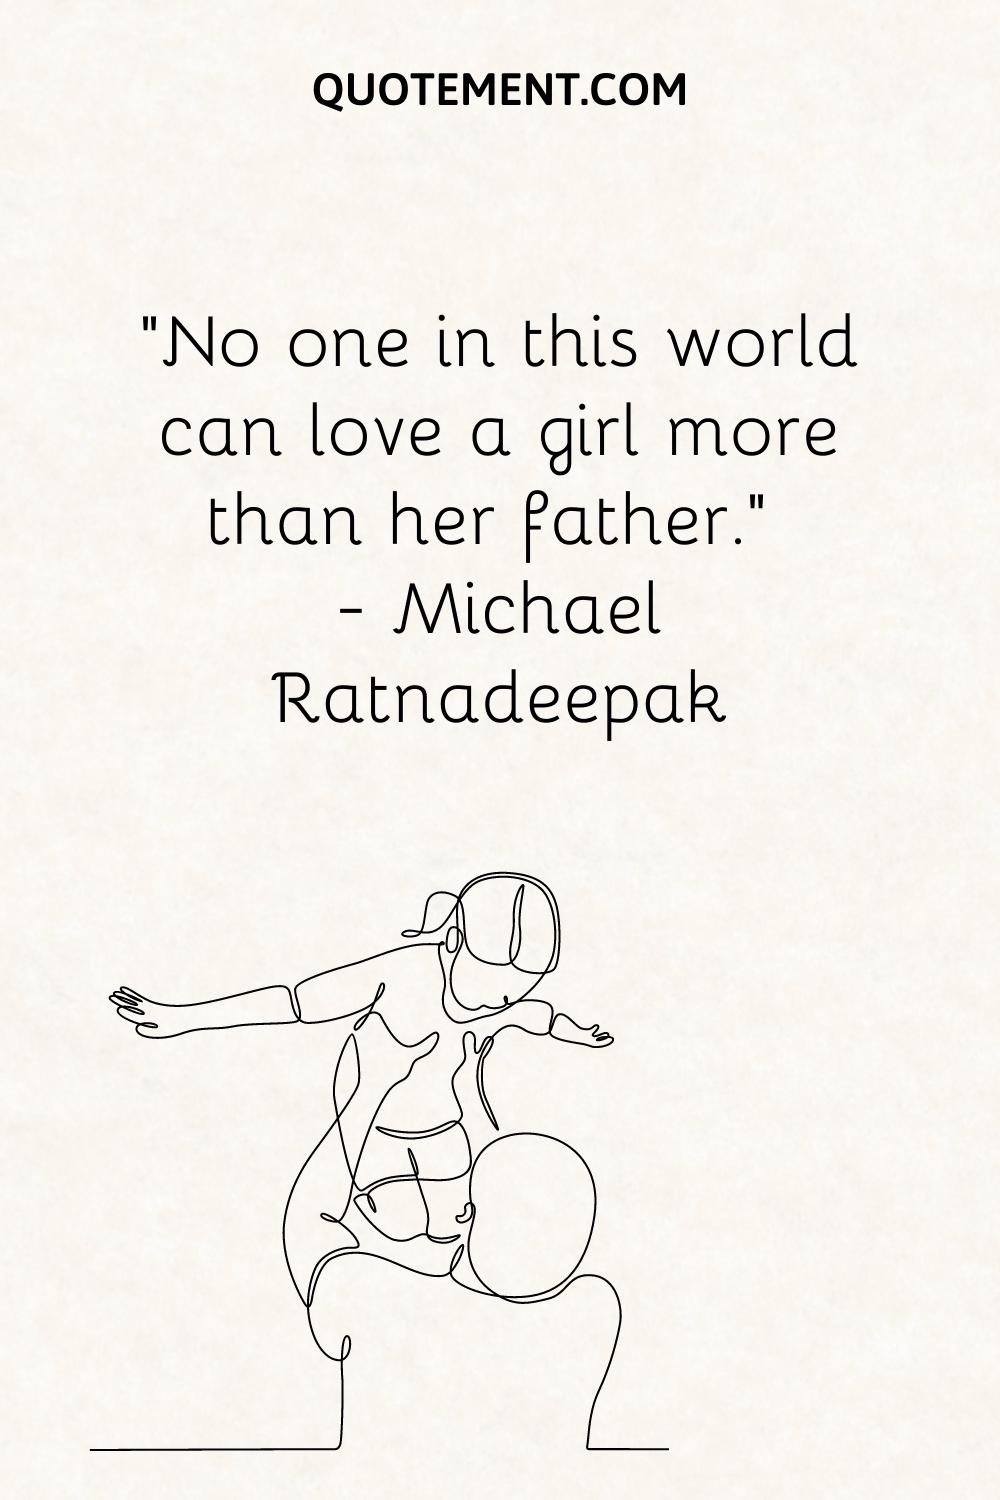 “No one in this world can love a girl more than her father.” — Michael Ratnadeepak